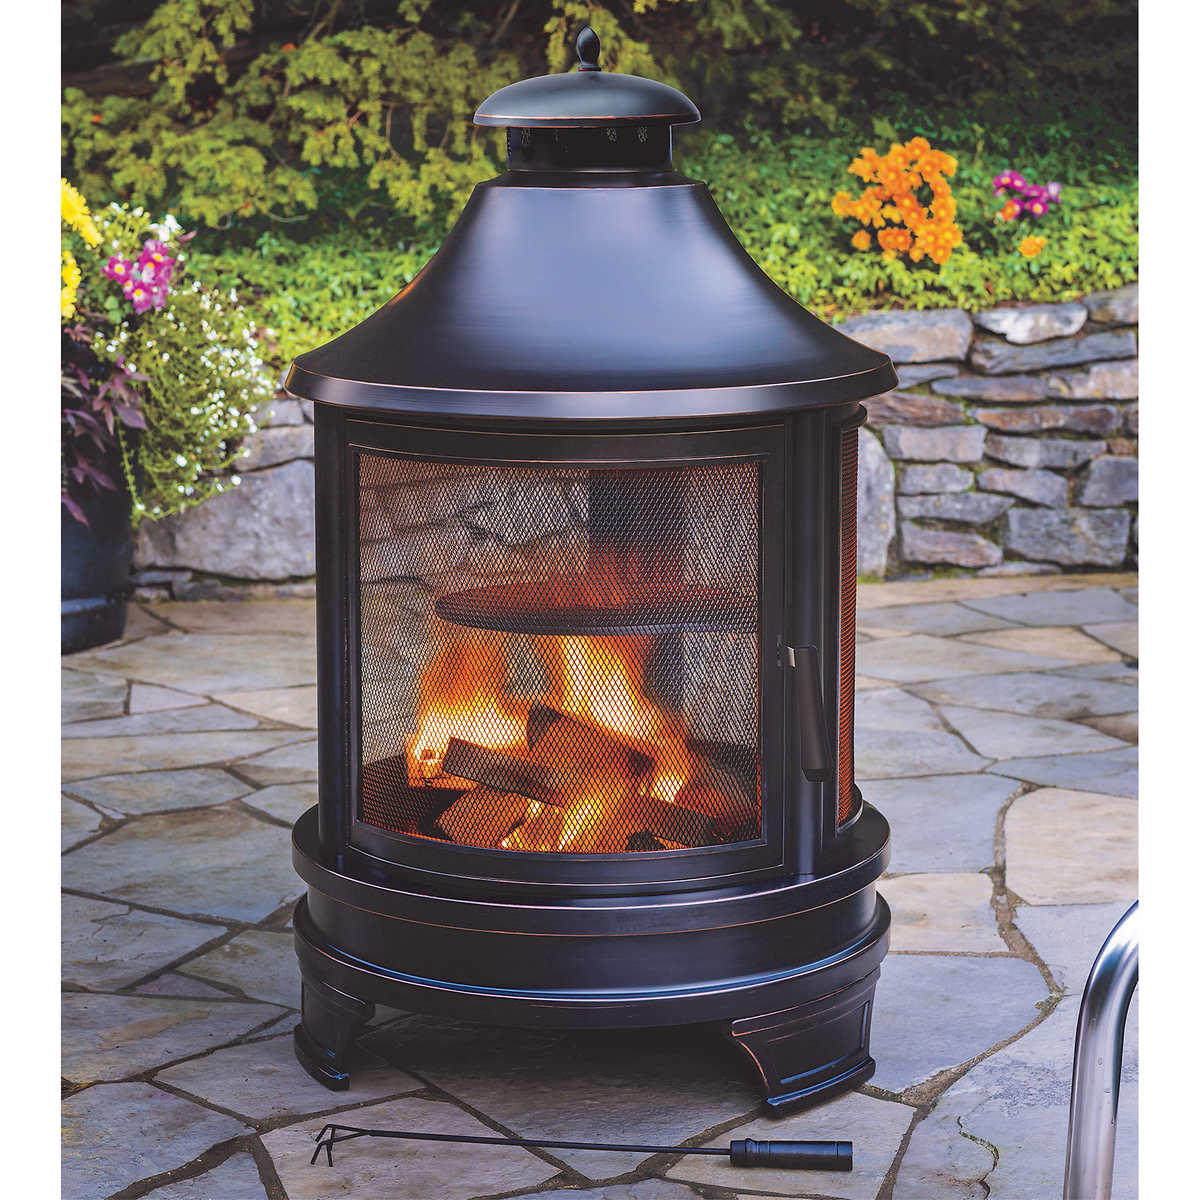 Outdoor Wood Burning Round Cooking Pit, Propane Gas Fire Pit Costco